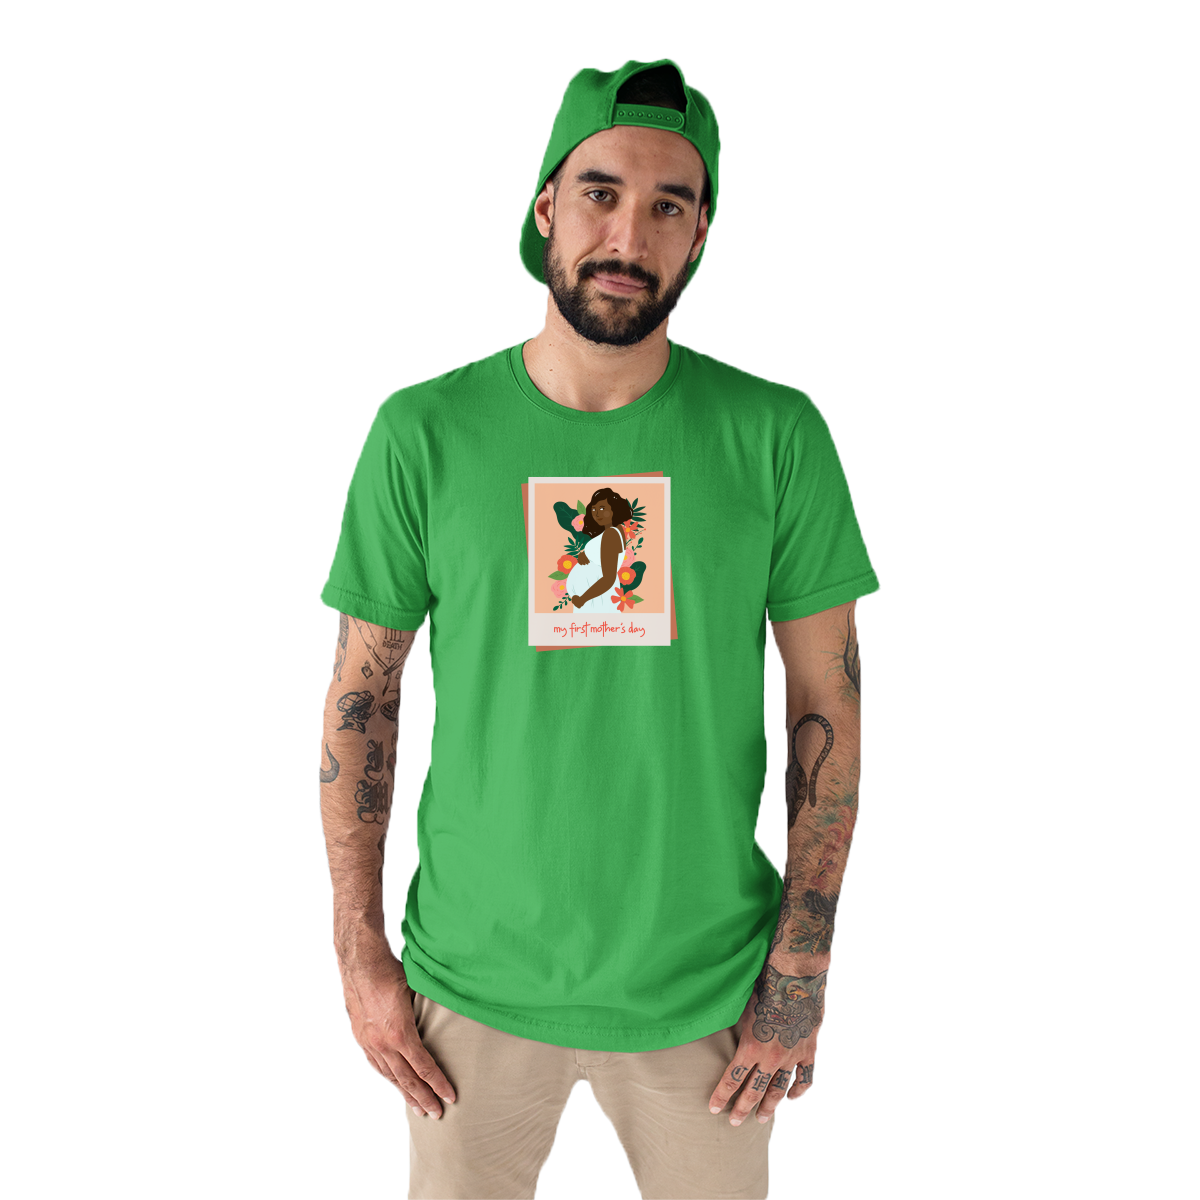 My First Mother's day Men's T-shirt | Green